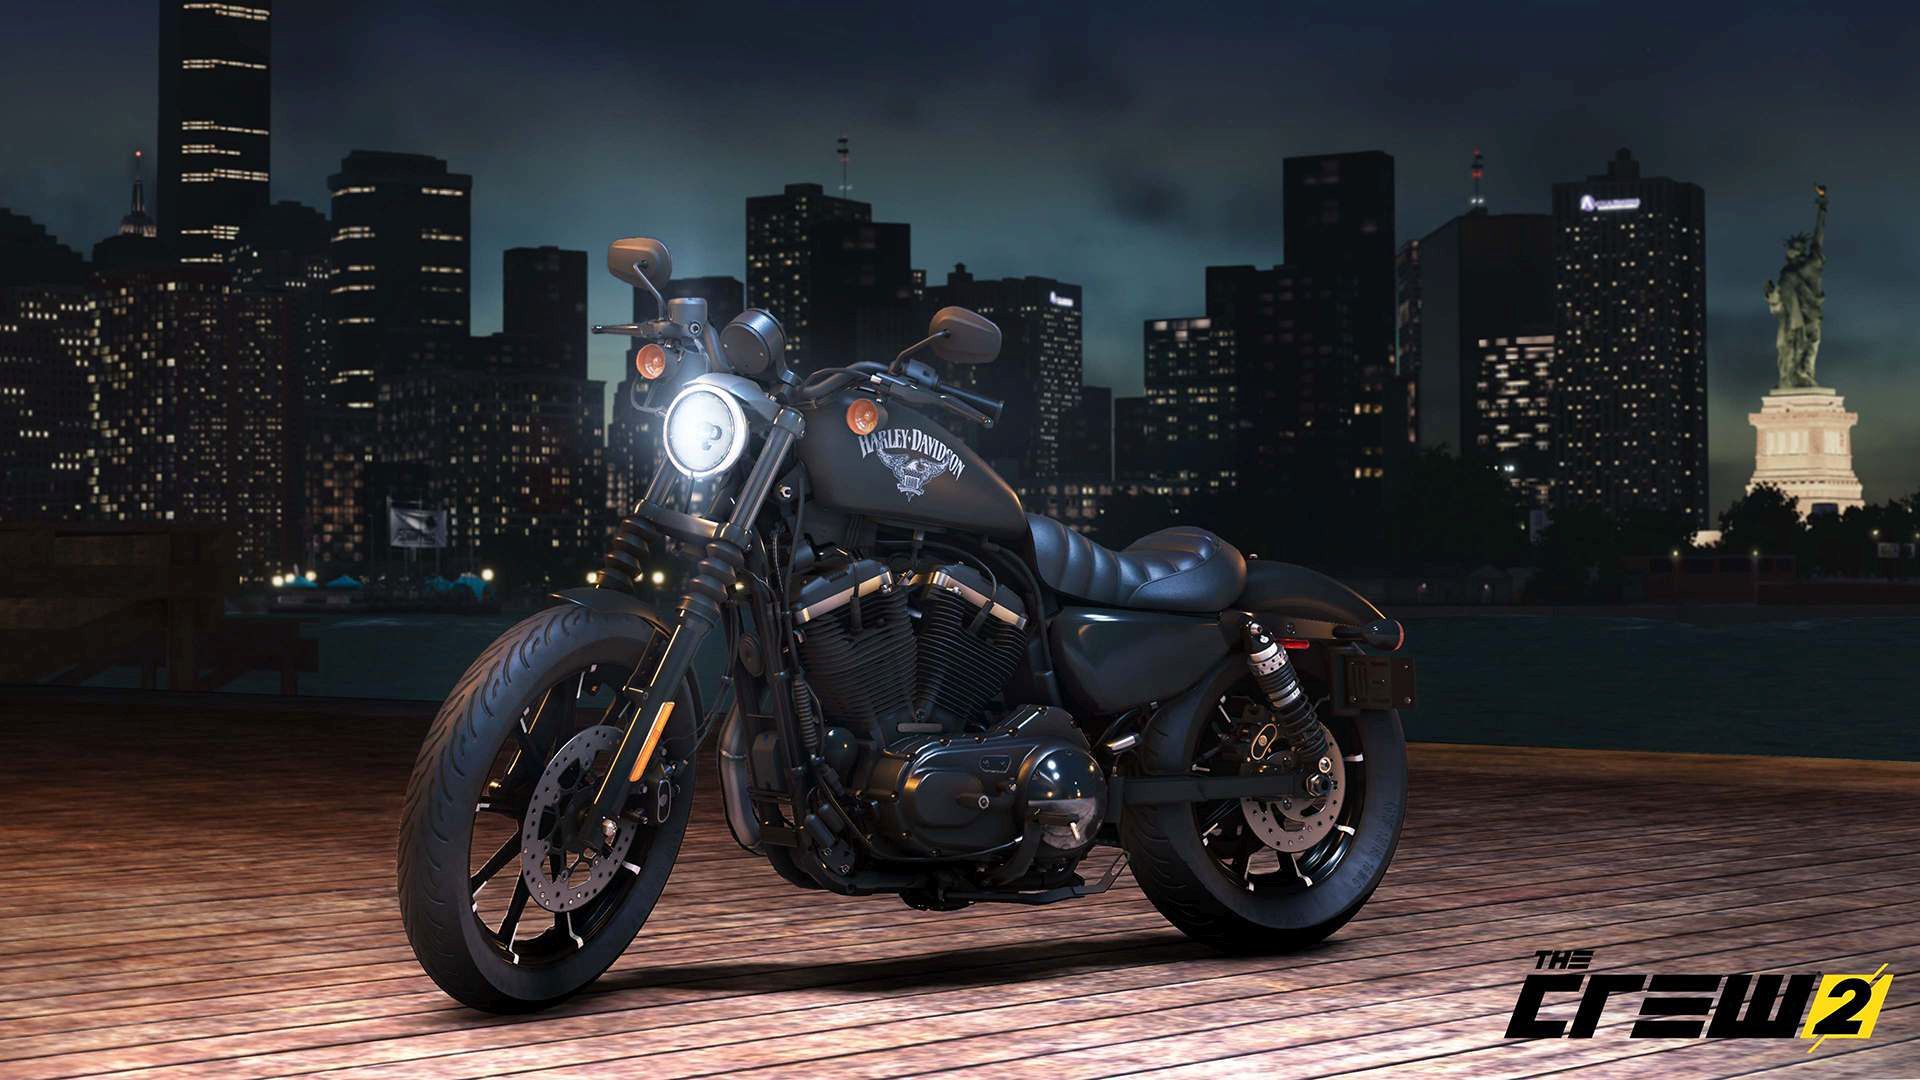 The Crew 2 Getting Harley Davidson Motorcycles Starting - Crew 2 Harley Davidson Iron 883 , HD Wallpaper & Backgrounds